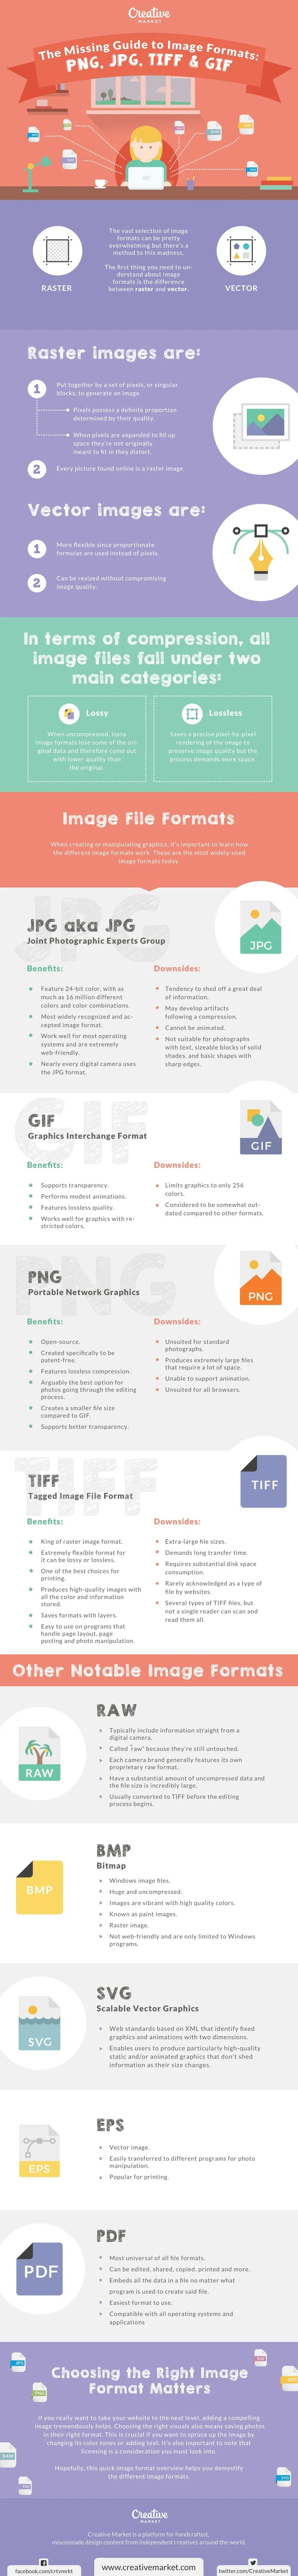 The Missing Guide to Image Formats: PNG, JPG, TIFF & GIF - #infographic